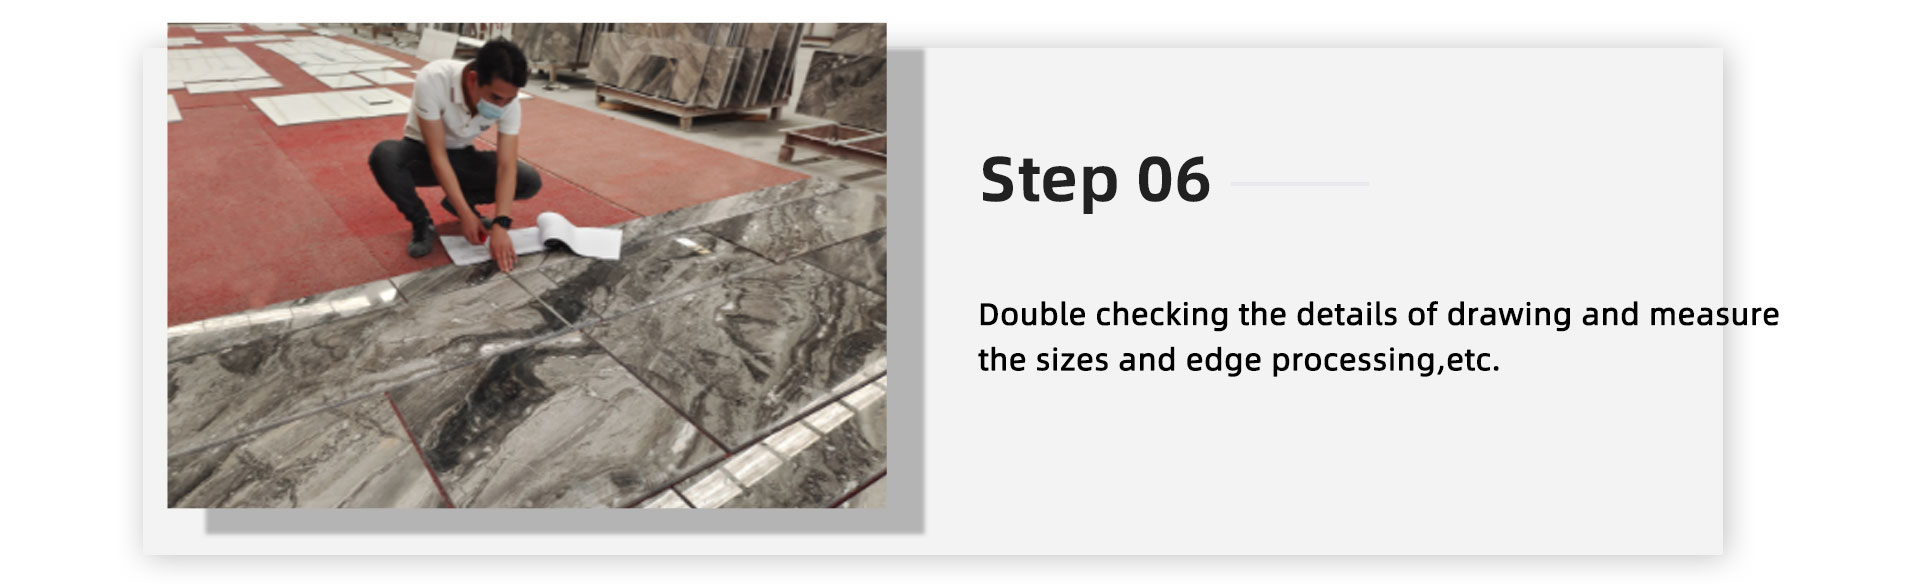 Double checking the details of drawing and measure the sizes and edge processing,etc.